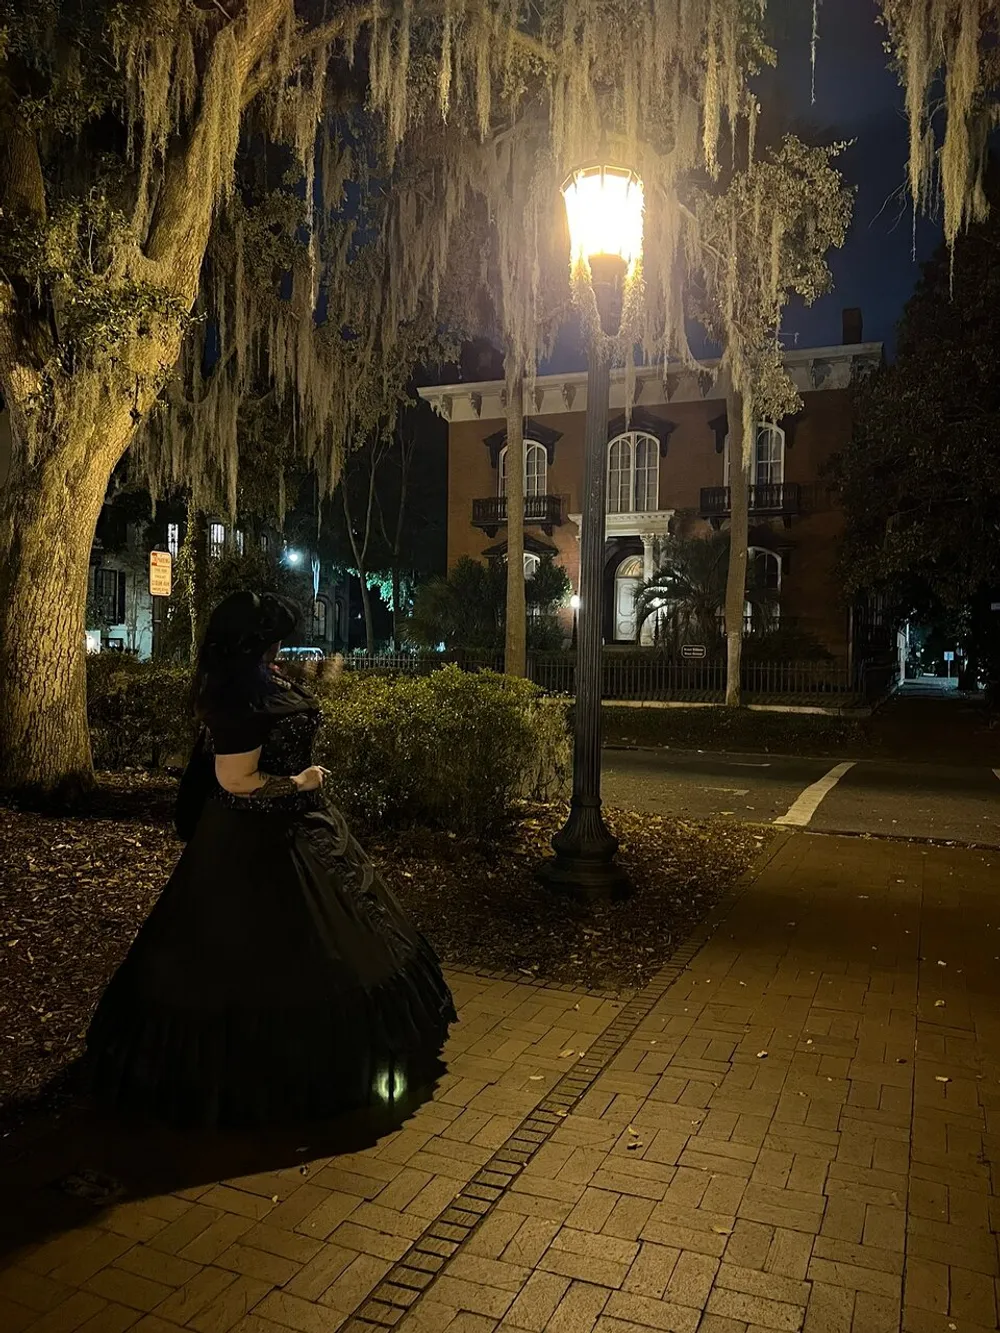 A person in a Victorian-style dress stands under a street lamp at night surrounded by Spanish moss-draped trees